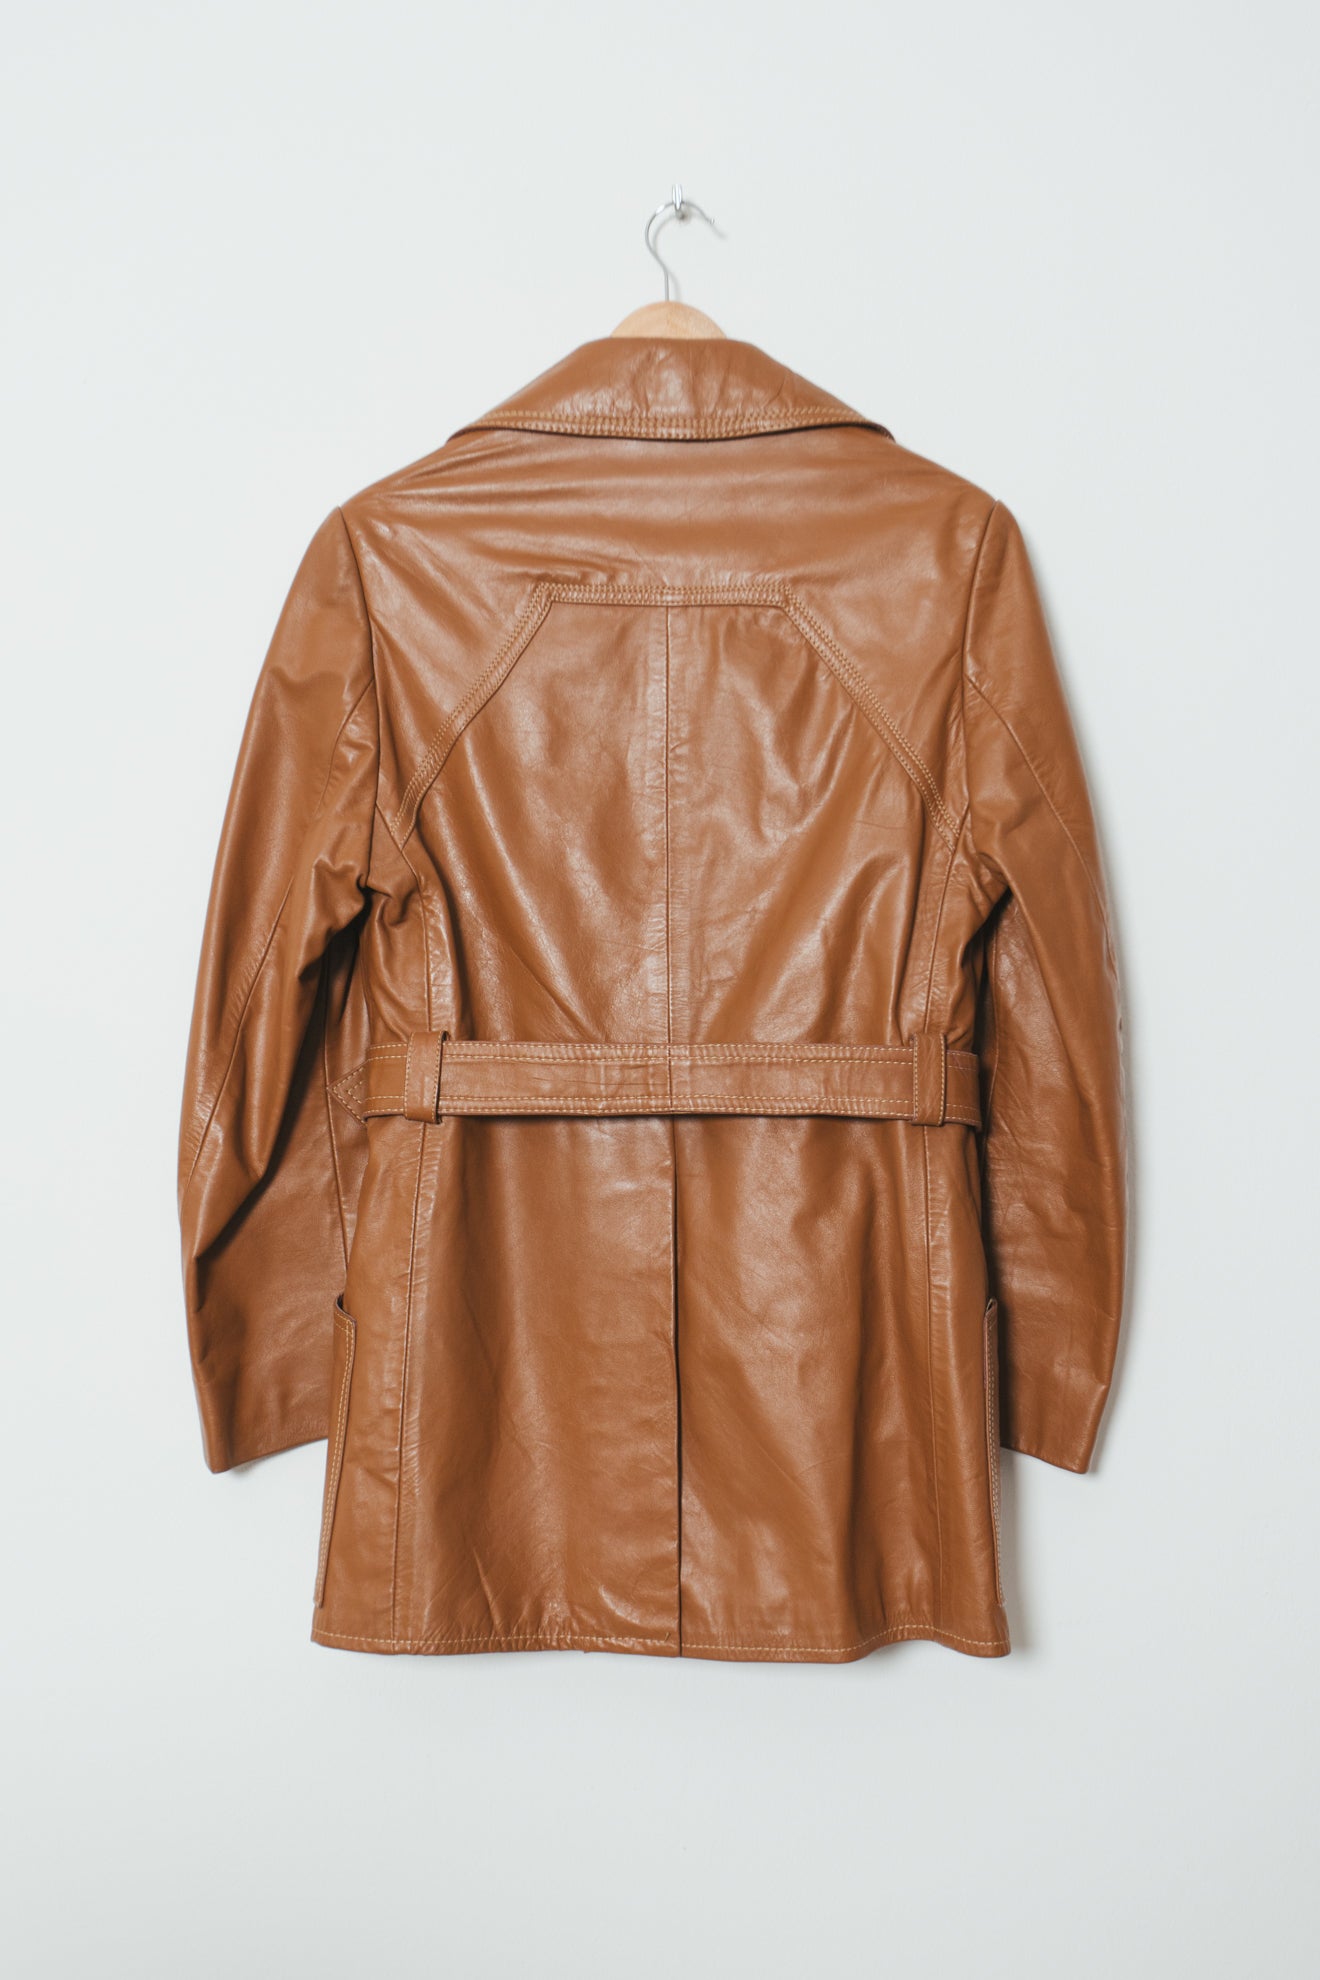 THE TAN LEATHER COAT (S/M)